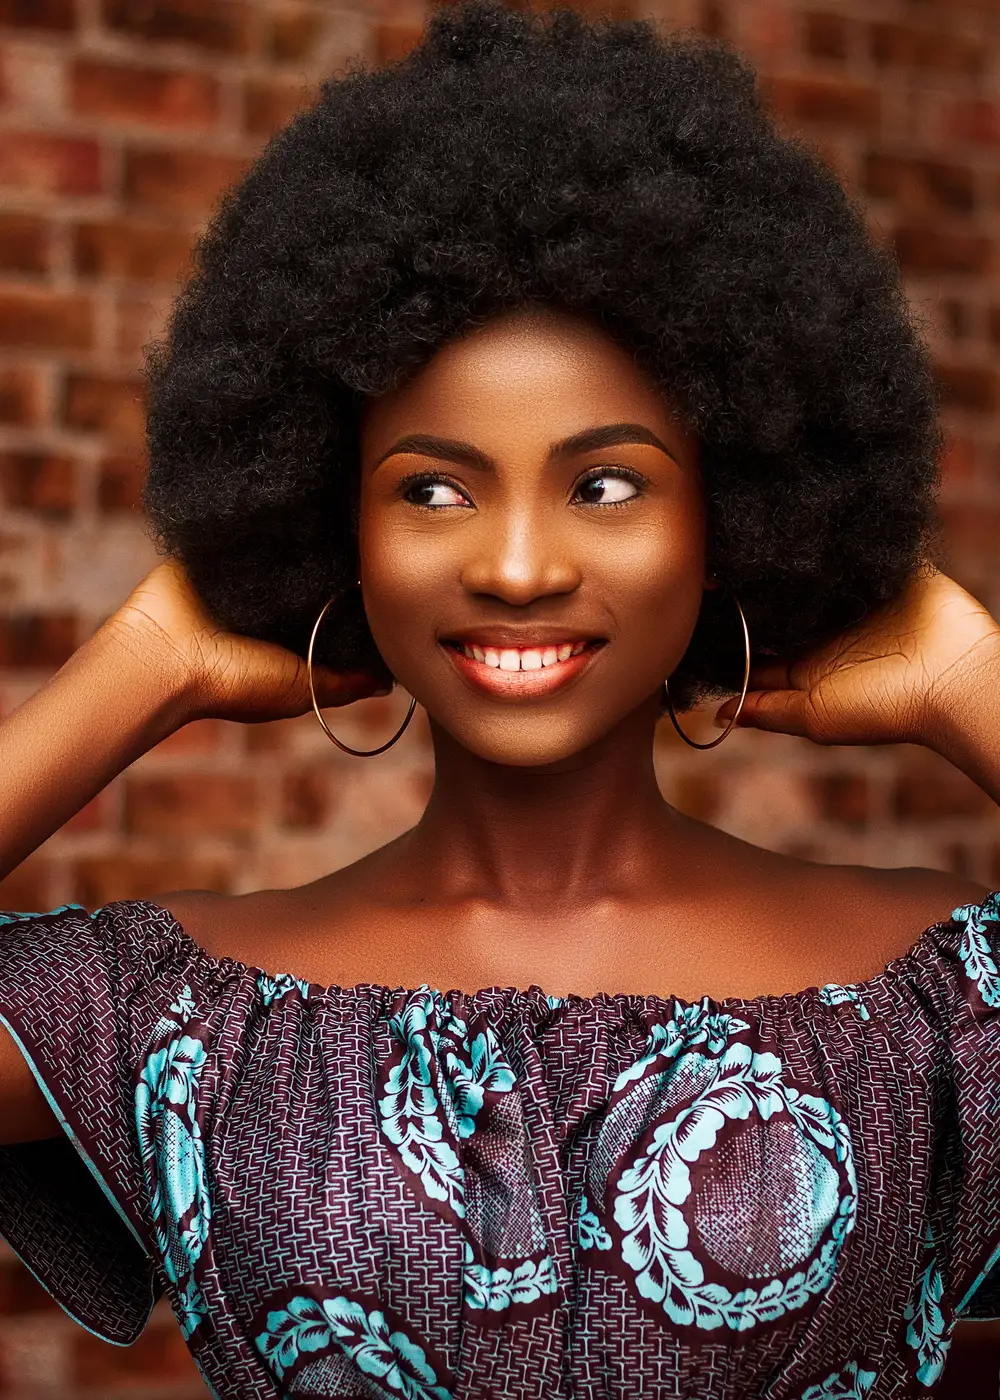 Smiling black lady on afro wig